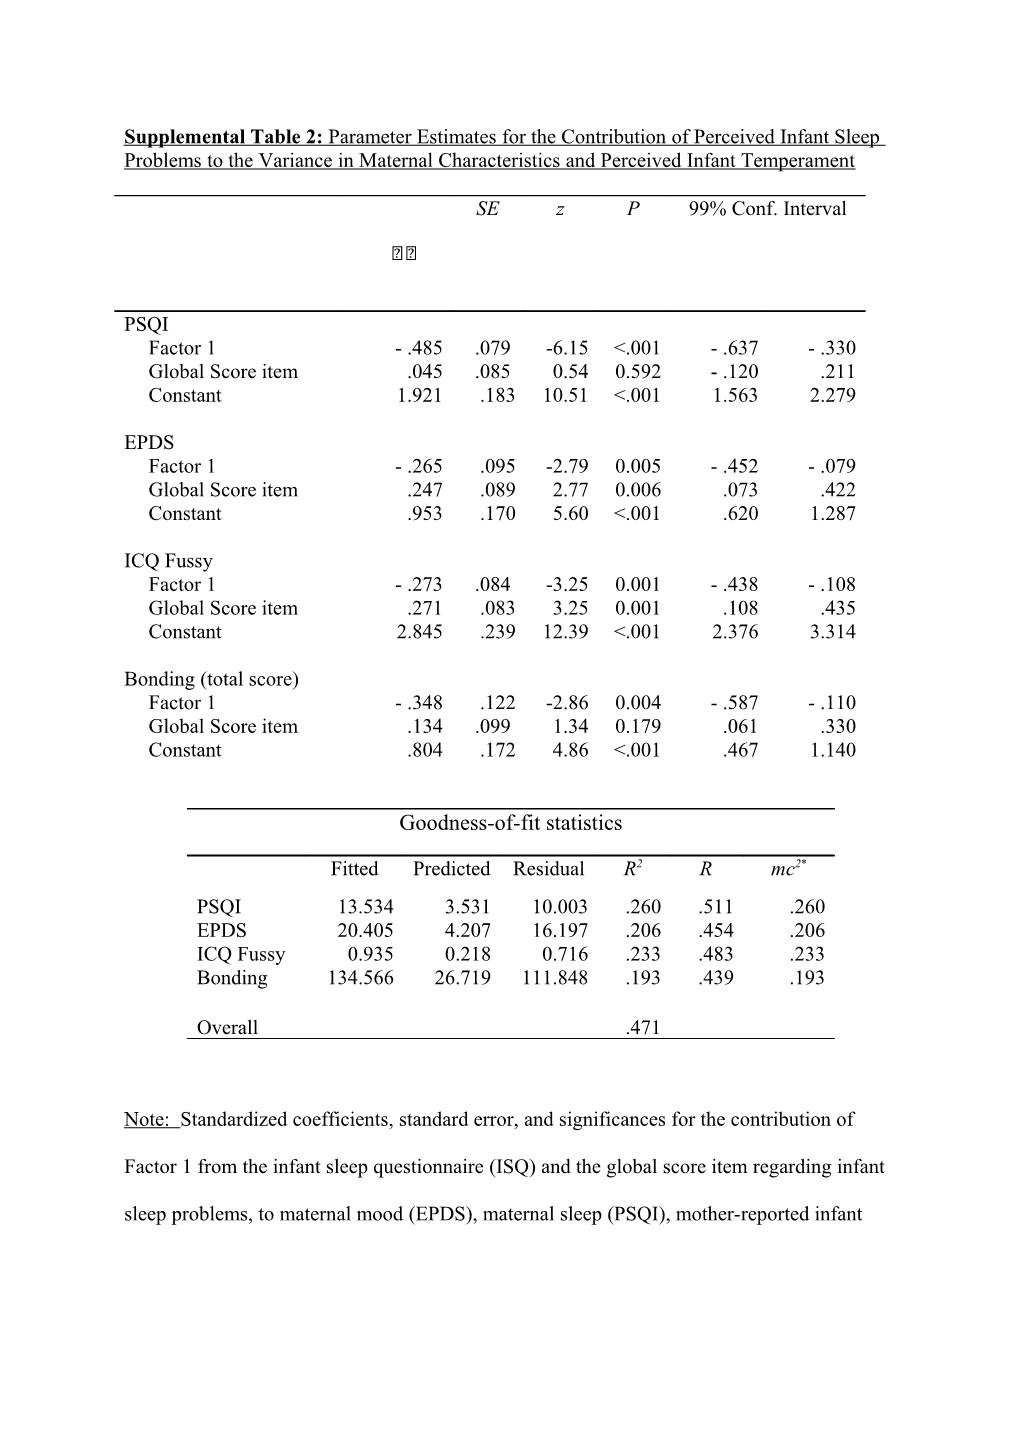 Supplemental Table 2: Parameter Estimates for the Contribution of Perceived Infant Sleep